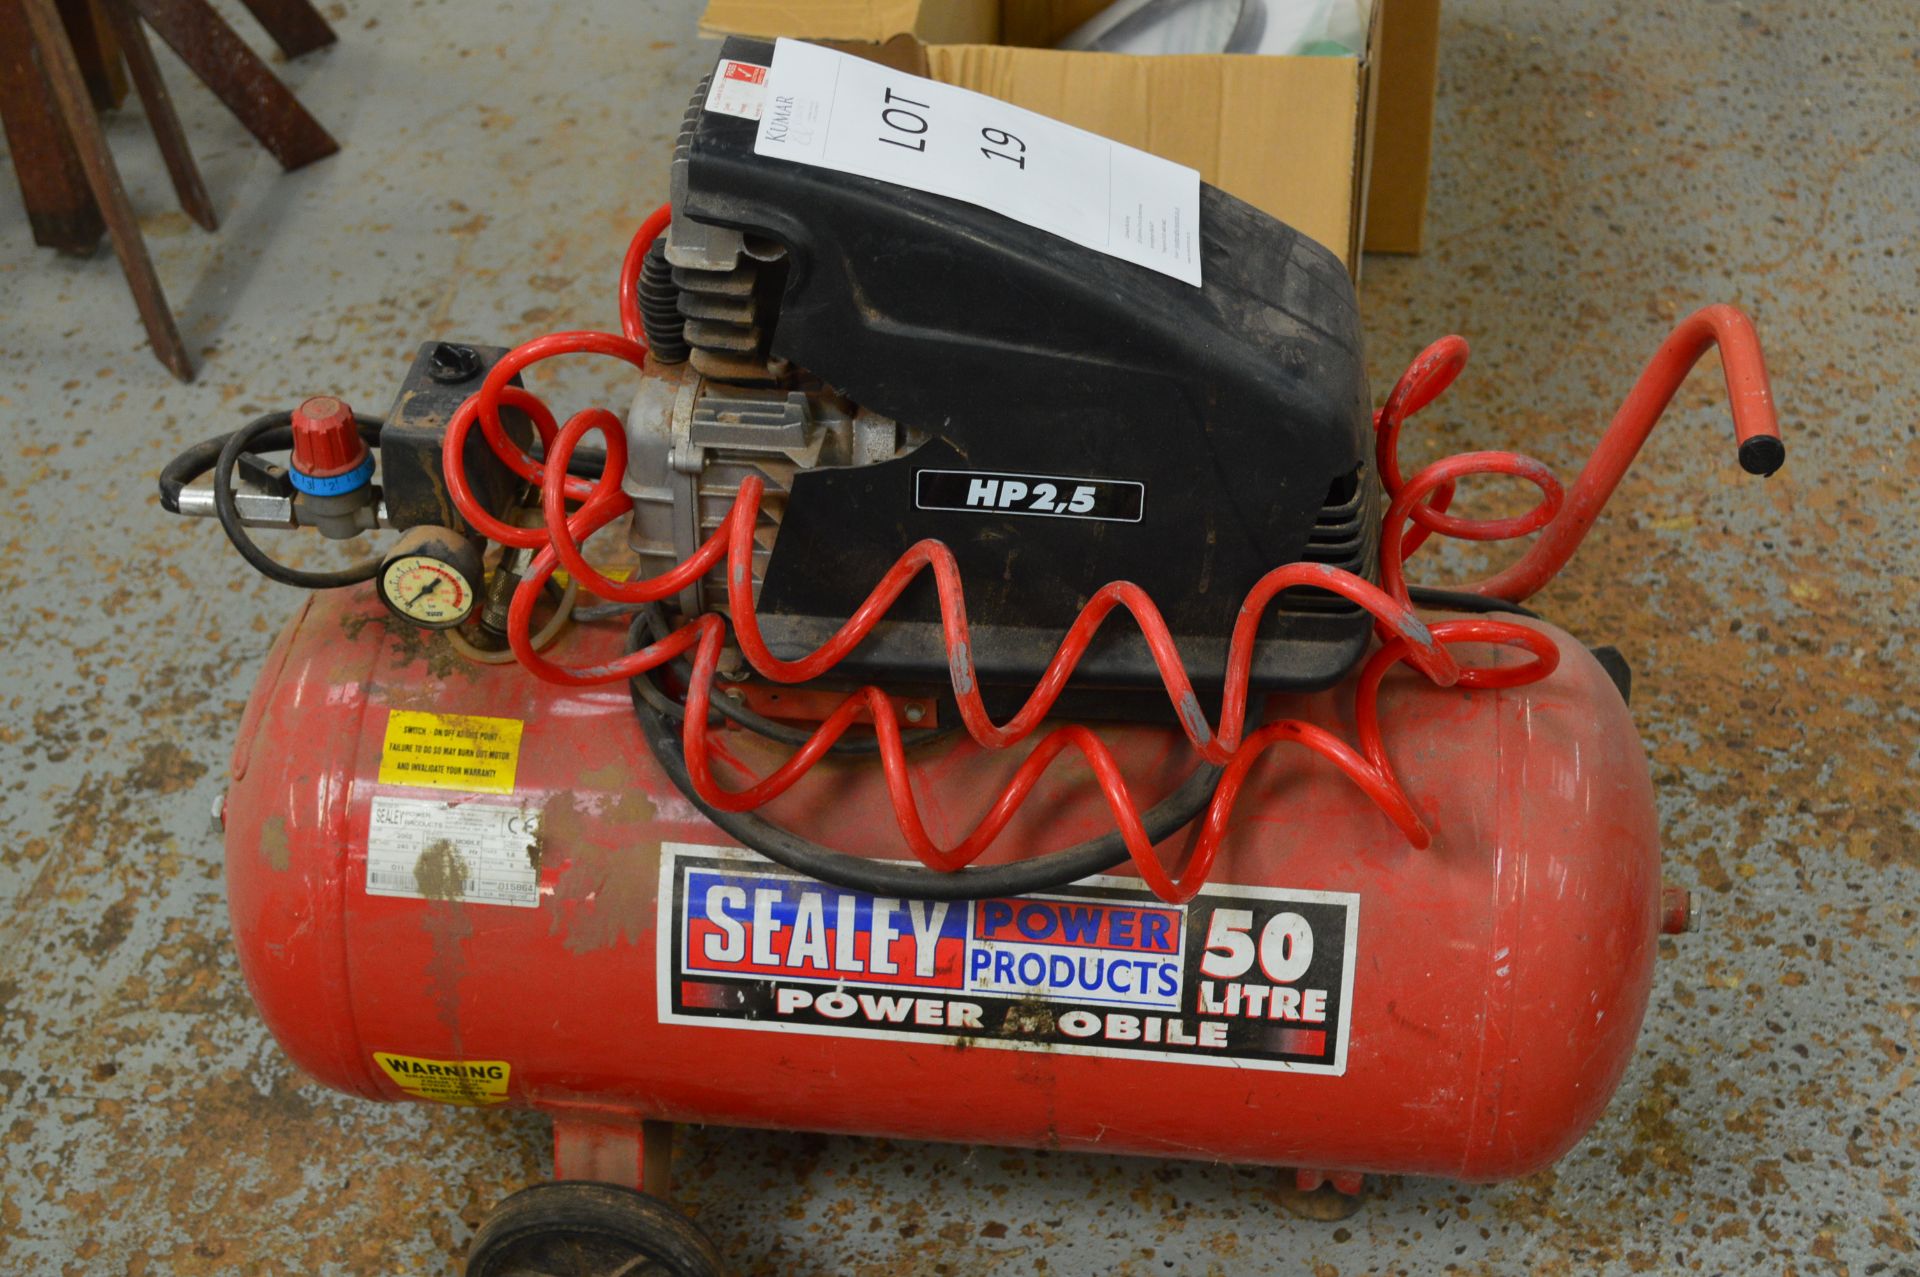 Sealey Power Mobile Compressor HP2.5 50Ltr Model SA9950/2. Serial No: 015864 (Please Note: Located - Image 2 of 4